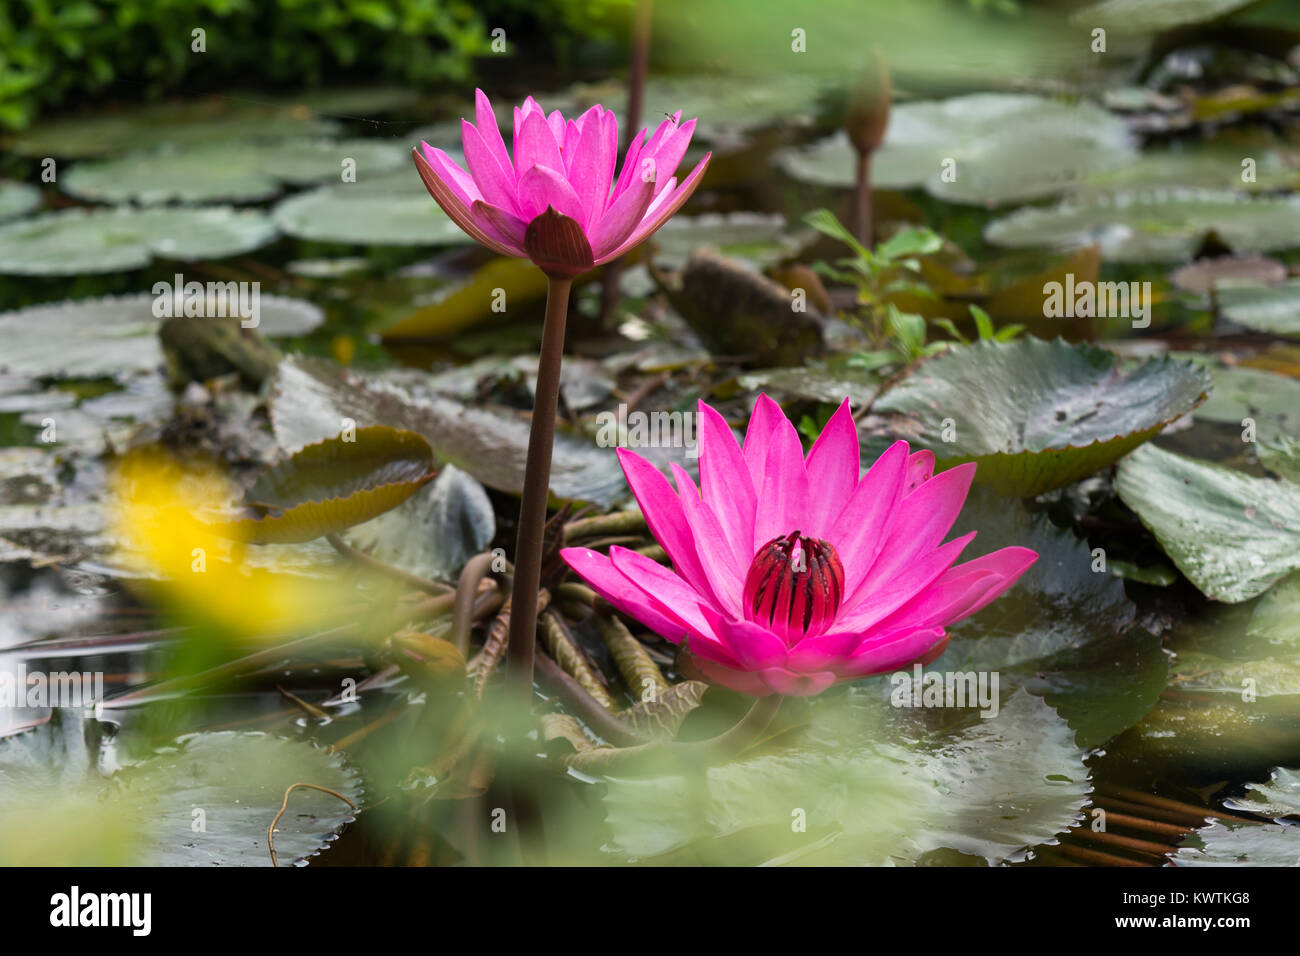 Two Lotus Flowers on water with leaves in garden Park pond Stock Photo